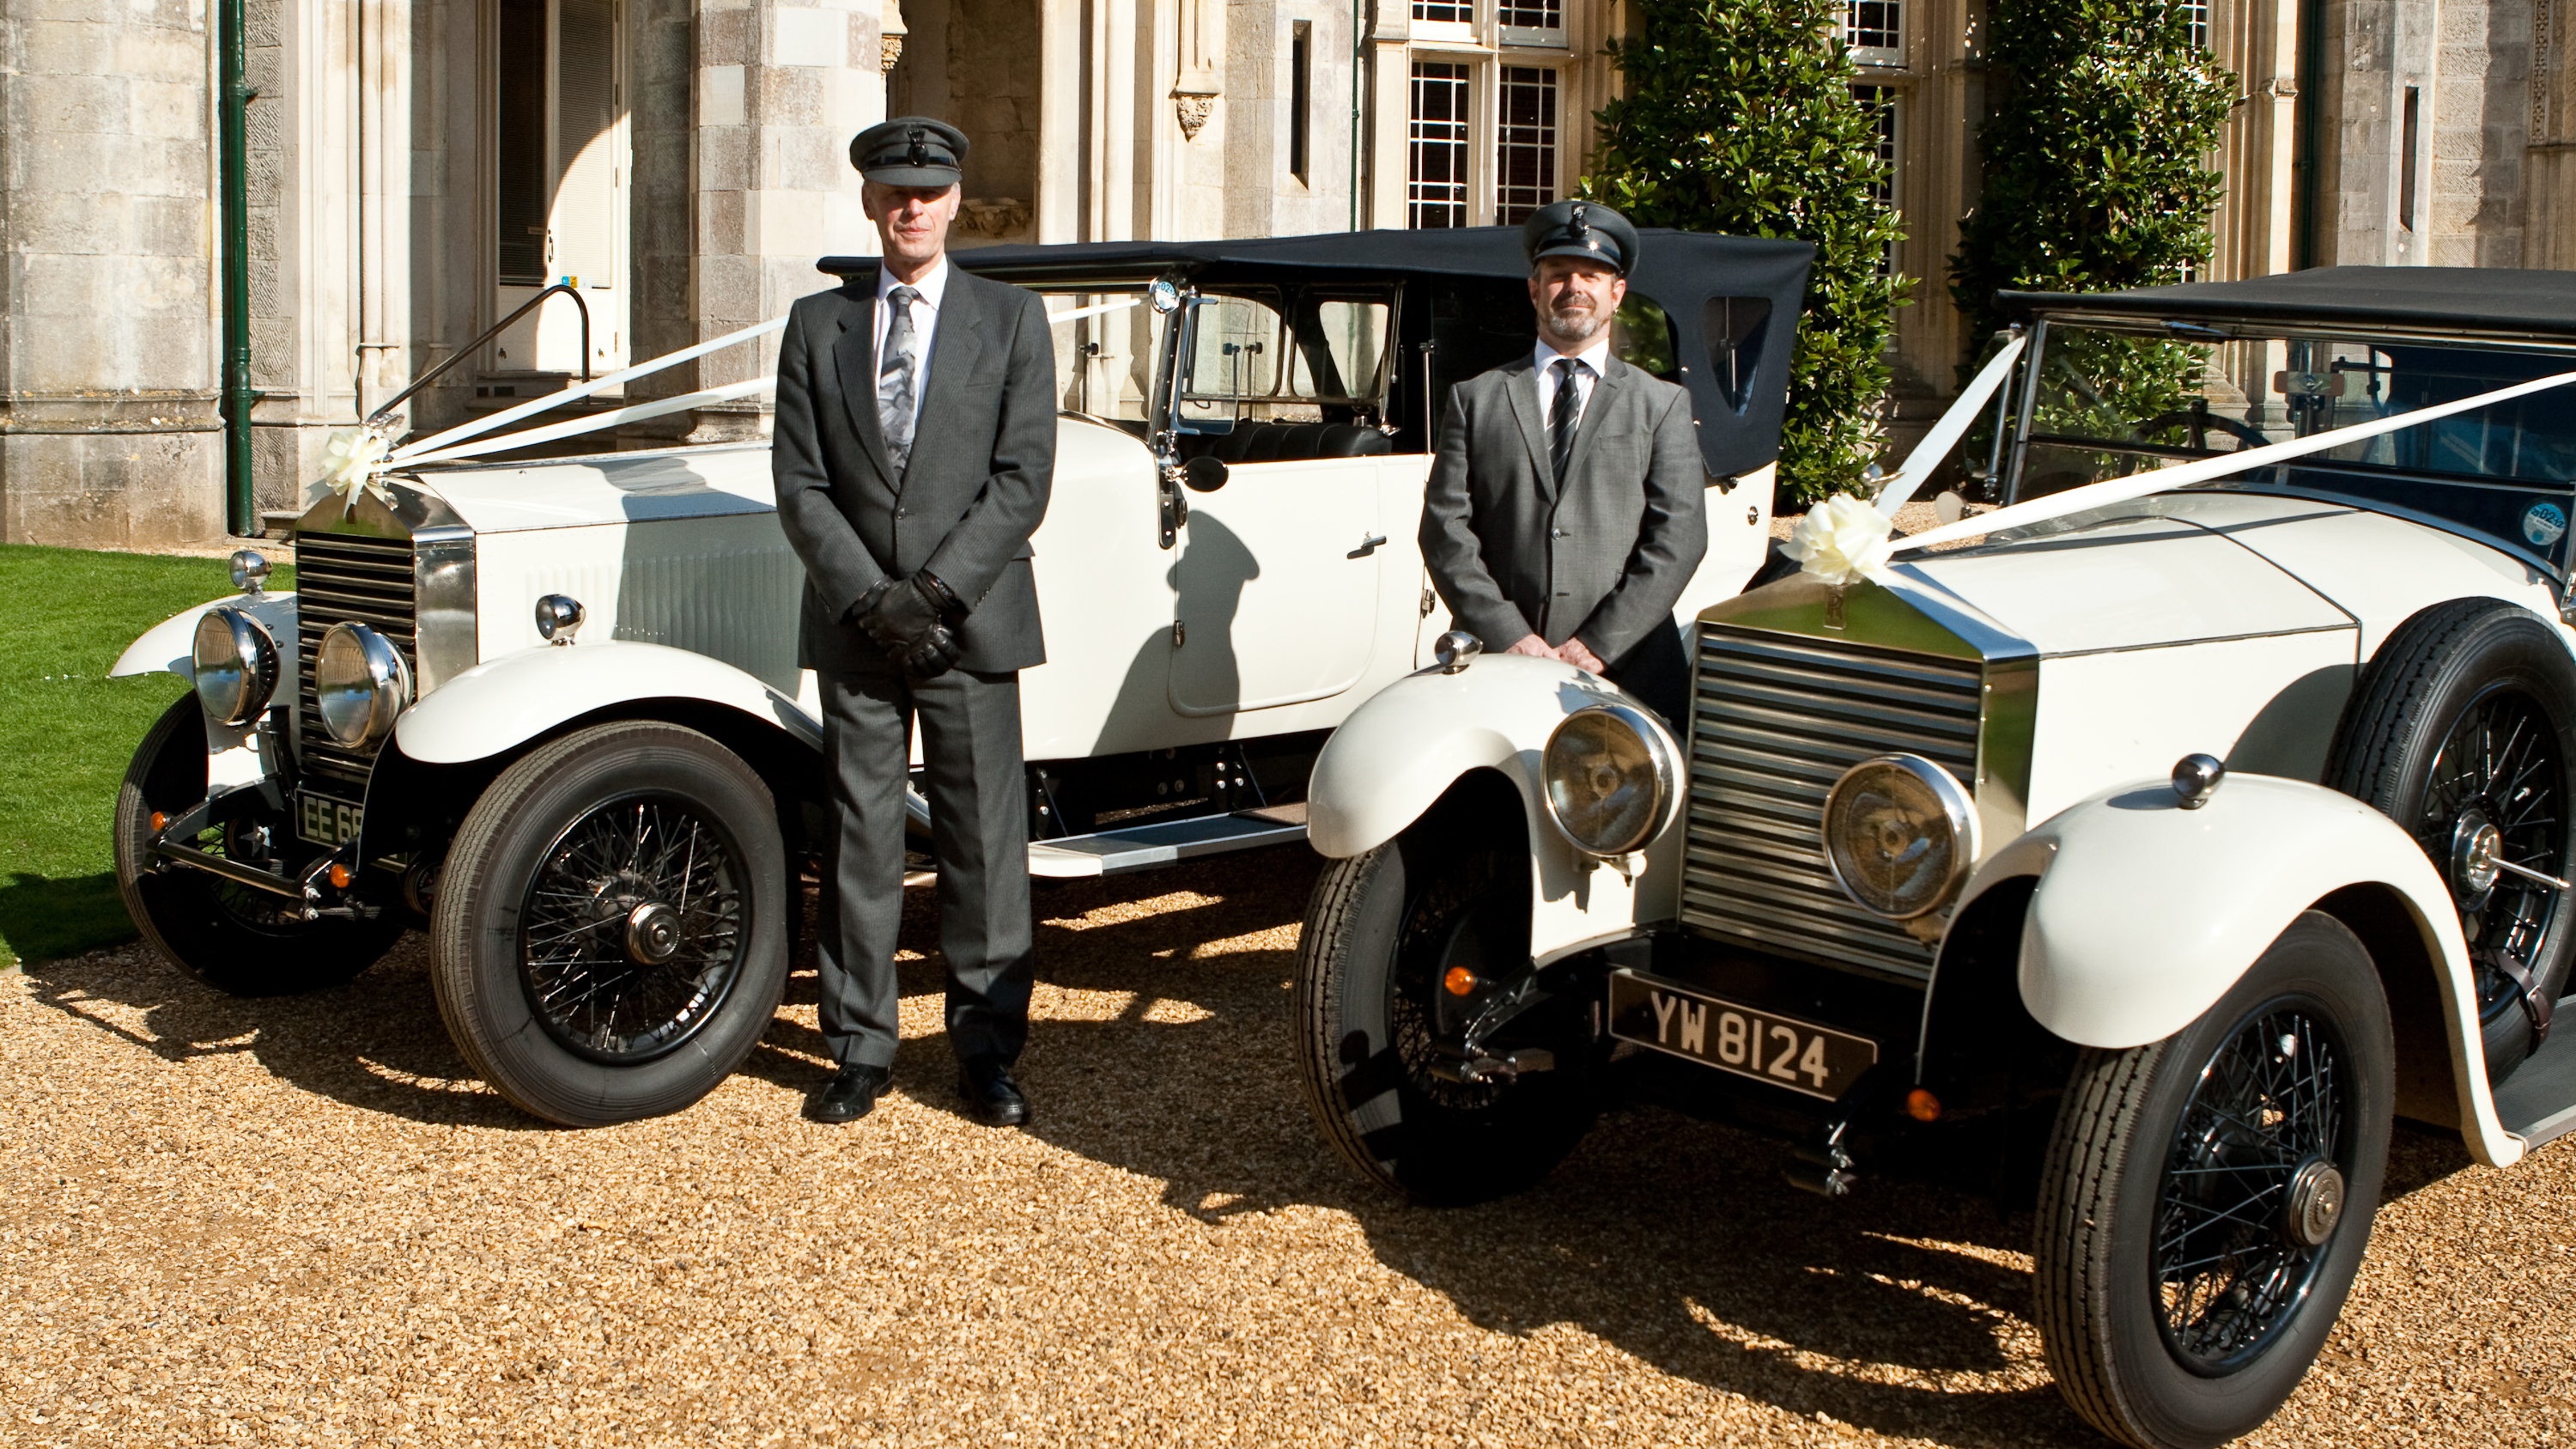 Two vintage wedding cars decorated with white ribbons and bows at a local Cranborne wedding. Both vehicles are parked side-by-side with their chauffeurs next to them.